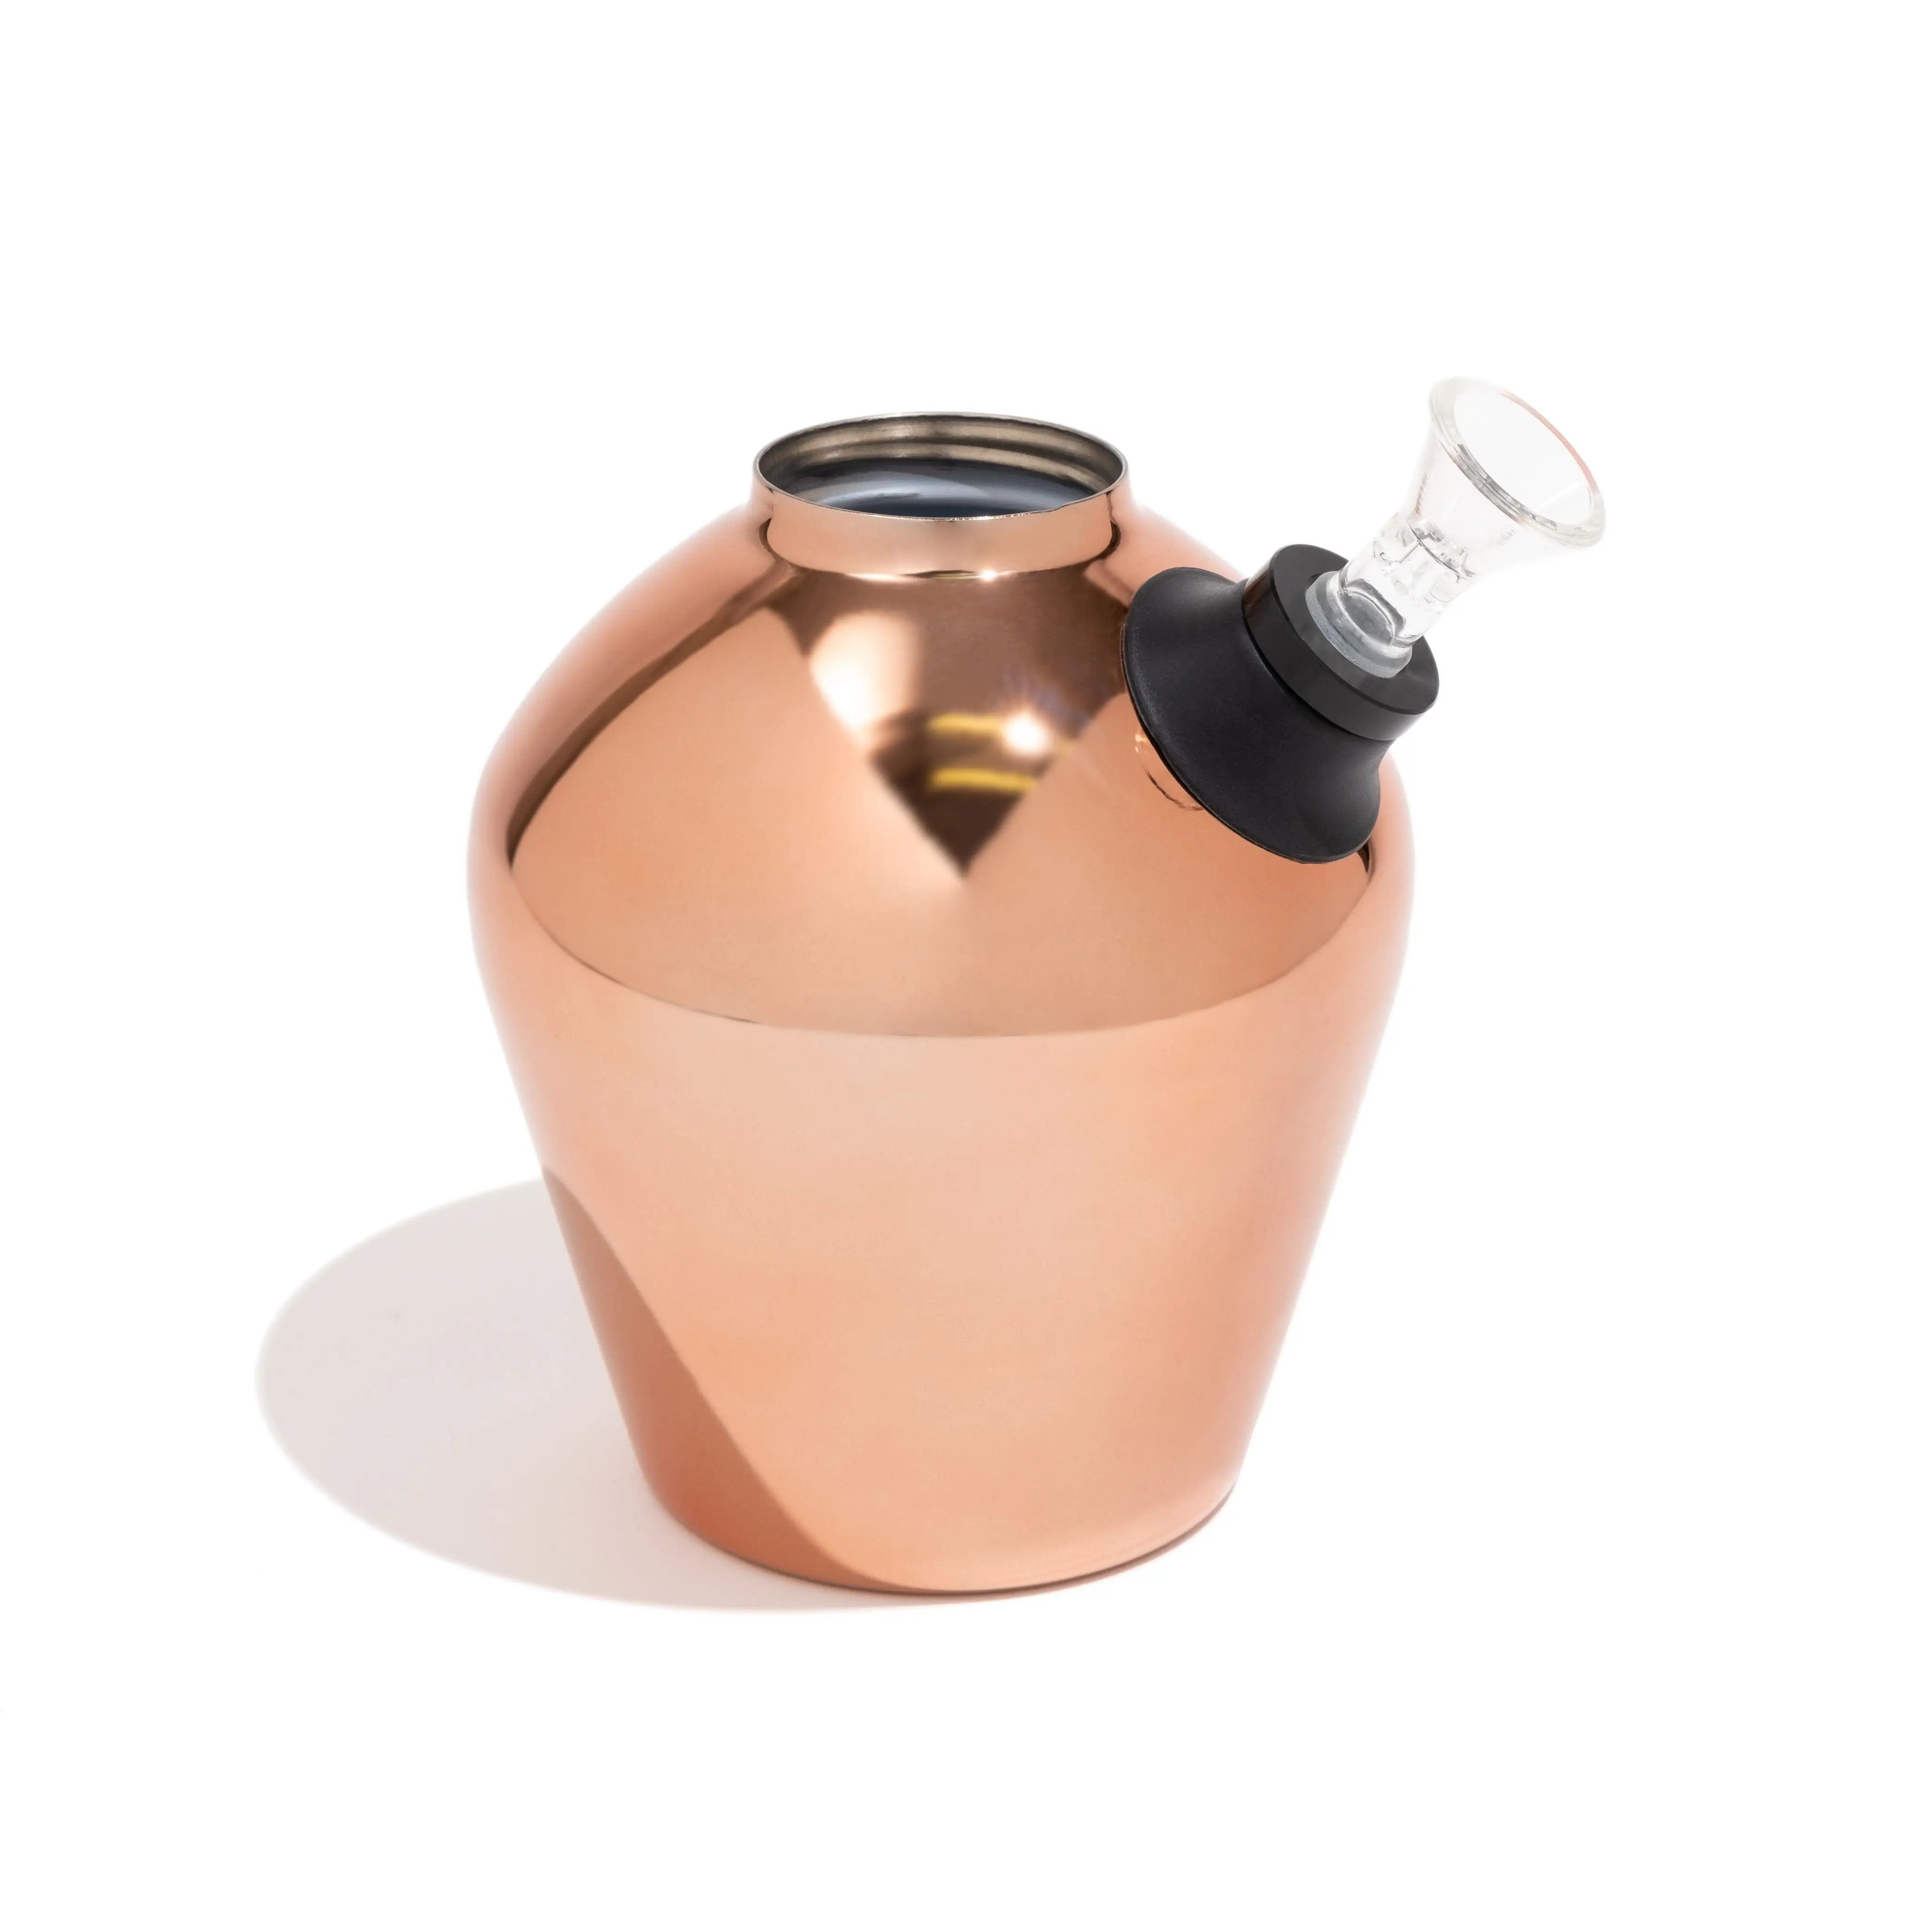 Chill - Limited Edition - Copper Mirror by Chill Steel Pipes